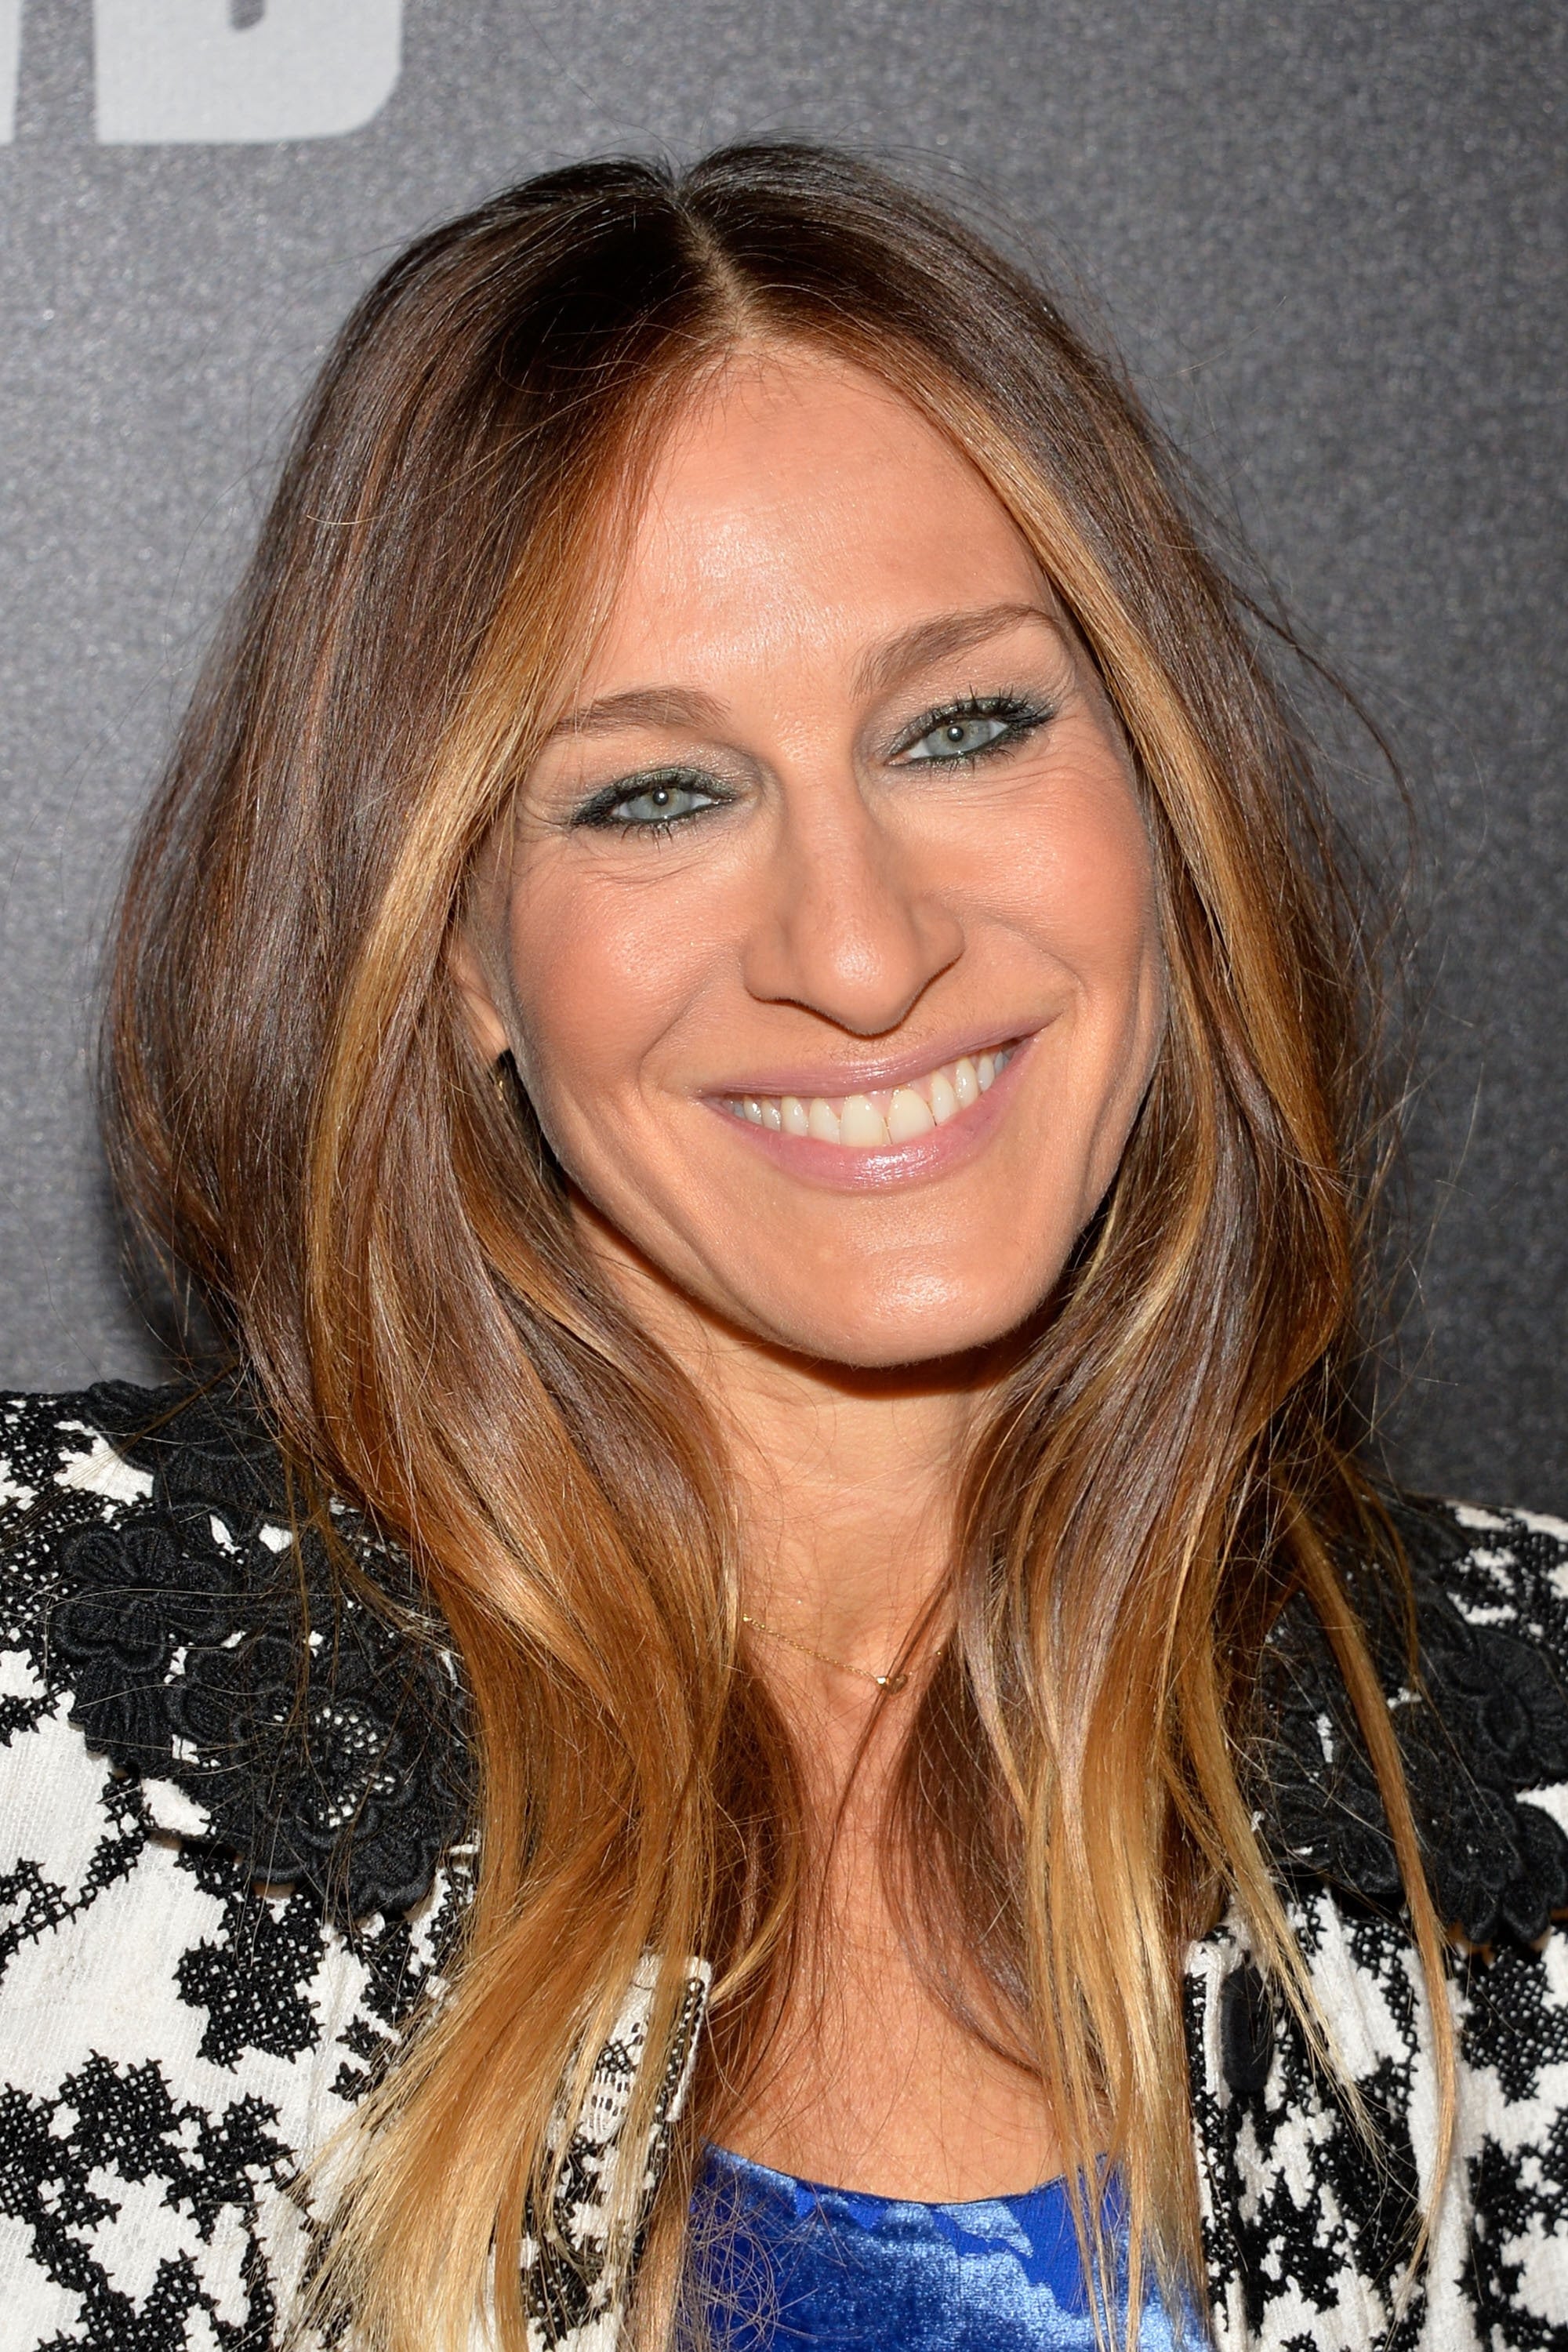 Pin by LH on Carrie (With images) | Sarah jessica parker 